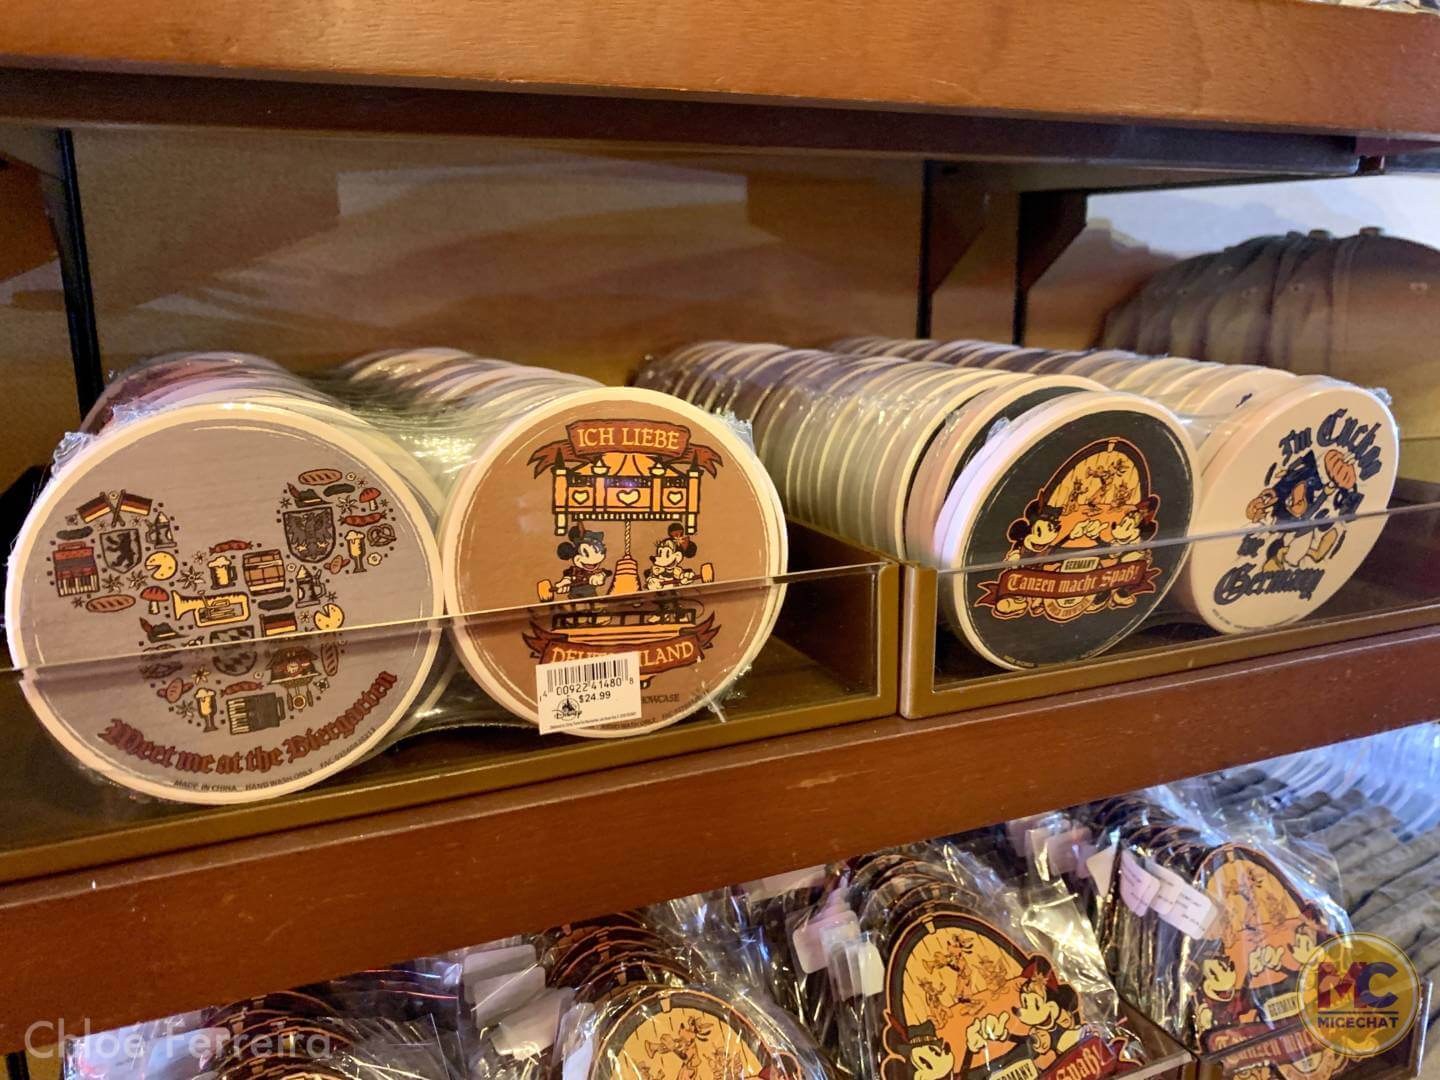 , NEW Annual Passholder Pop-Up Store Opens at EPCOT